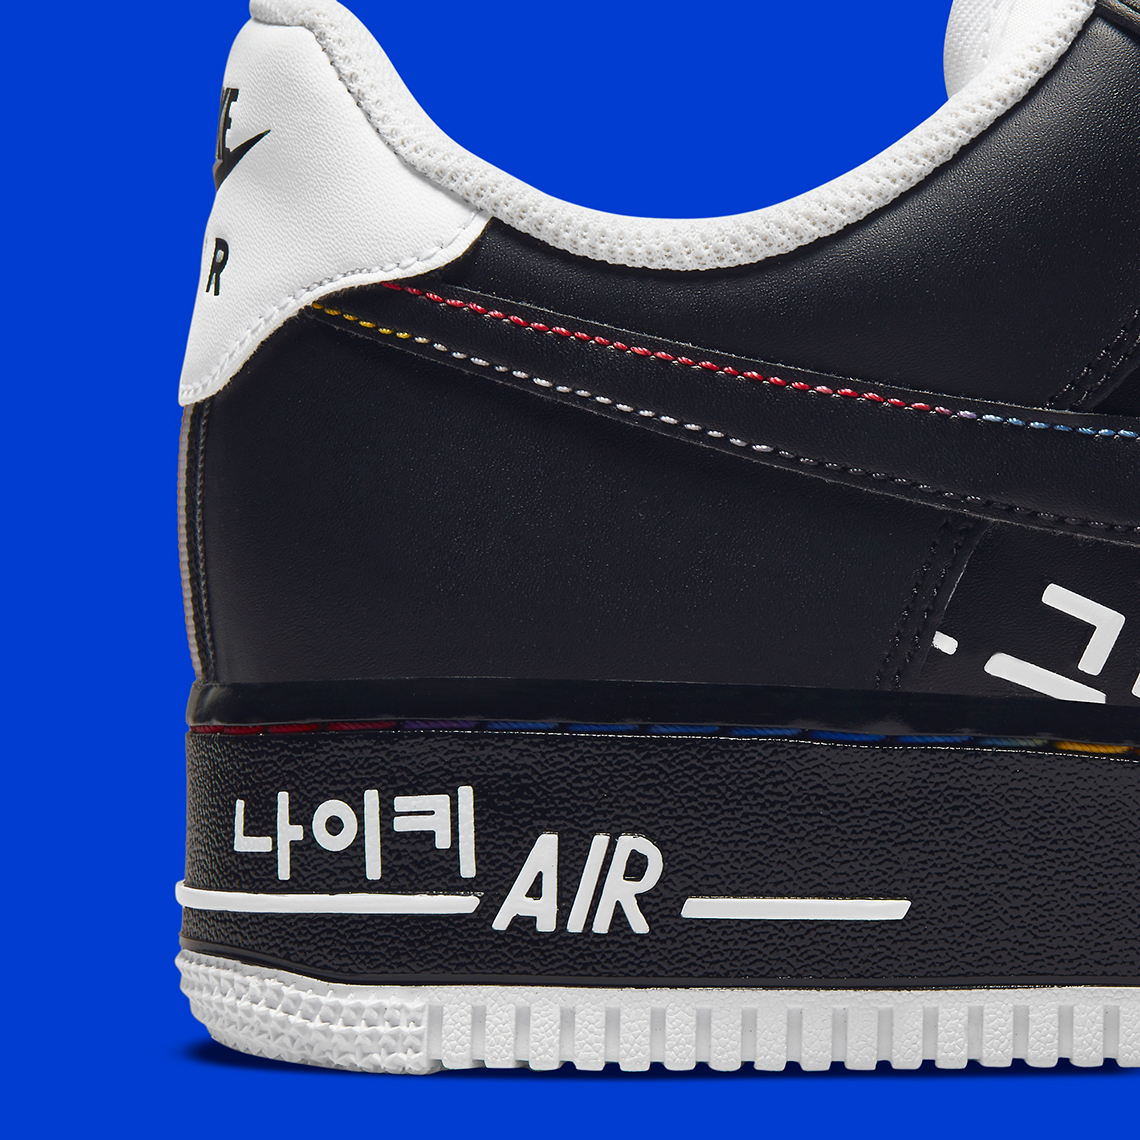 Nike Alternate Your Look With The Nike Air Max 95 Yin Yang Low Hangul Day Do2704 010 6